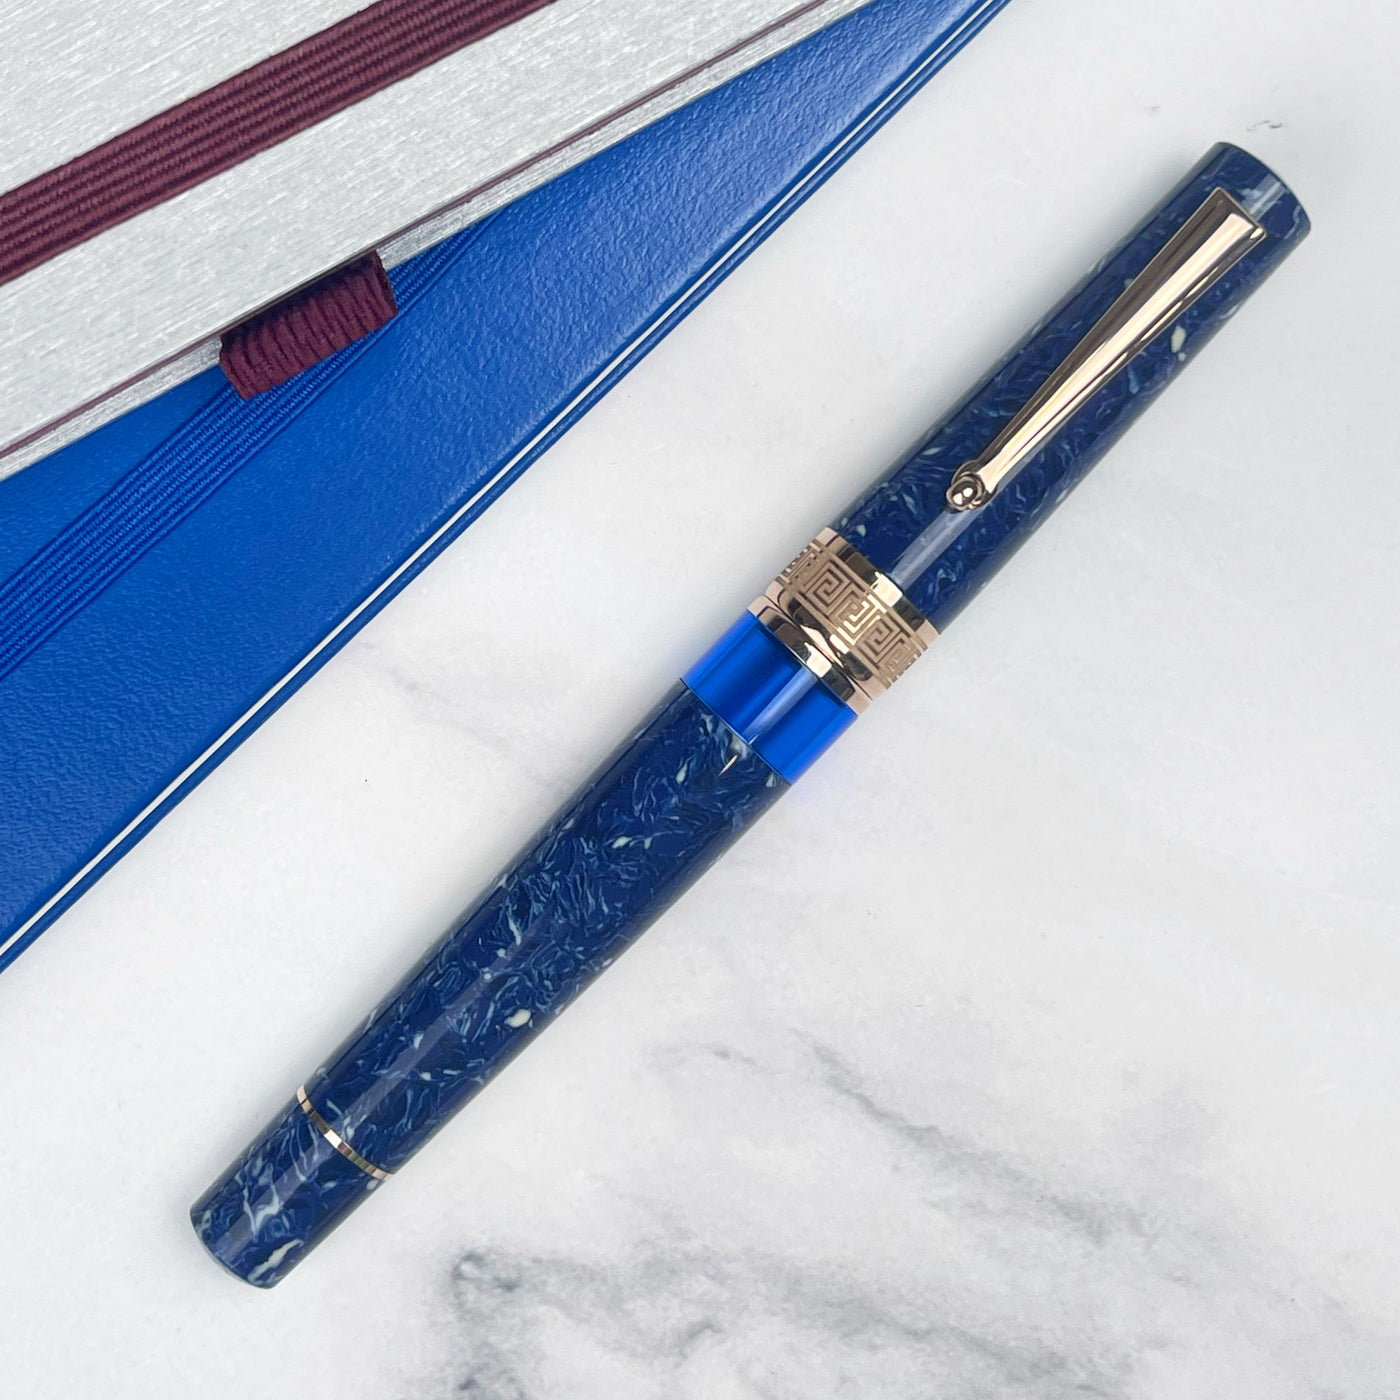 Delta Lapis Blue Celluloid Fountain Pen with Rose Gold Trim (Limited Edition)